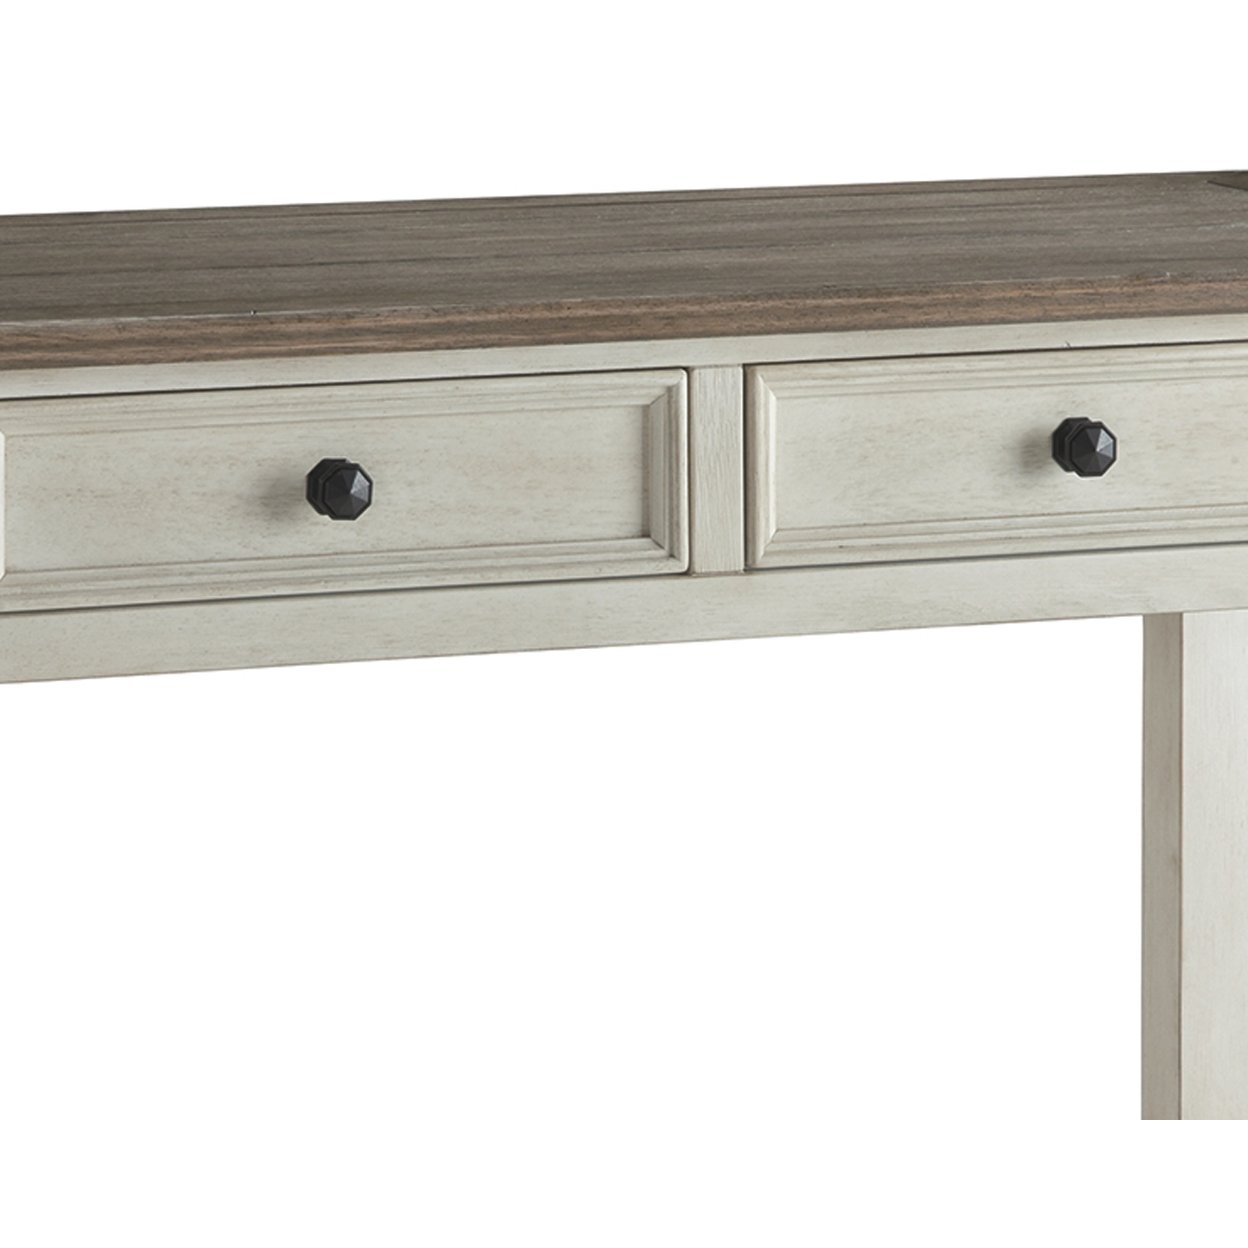 Sofa Table With Plank Style Top And 2 Gliding Drawers, Brown And White- Saltoro Sherpi